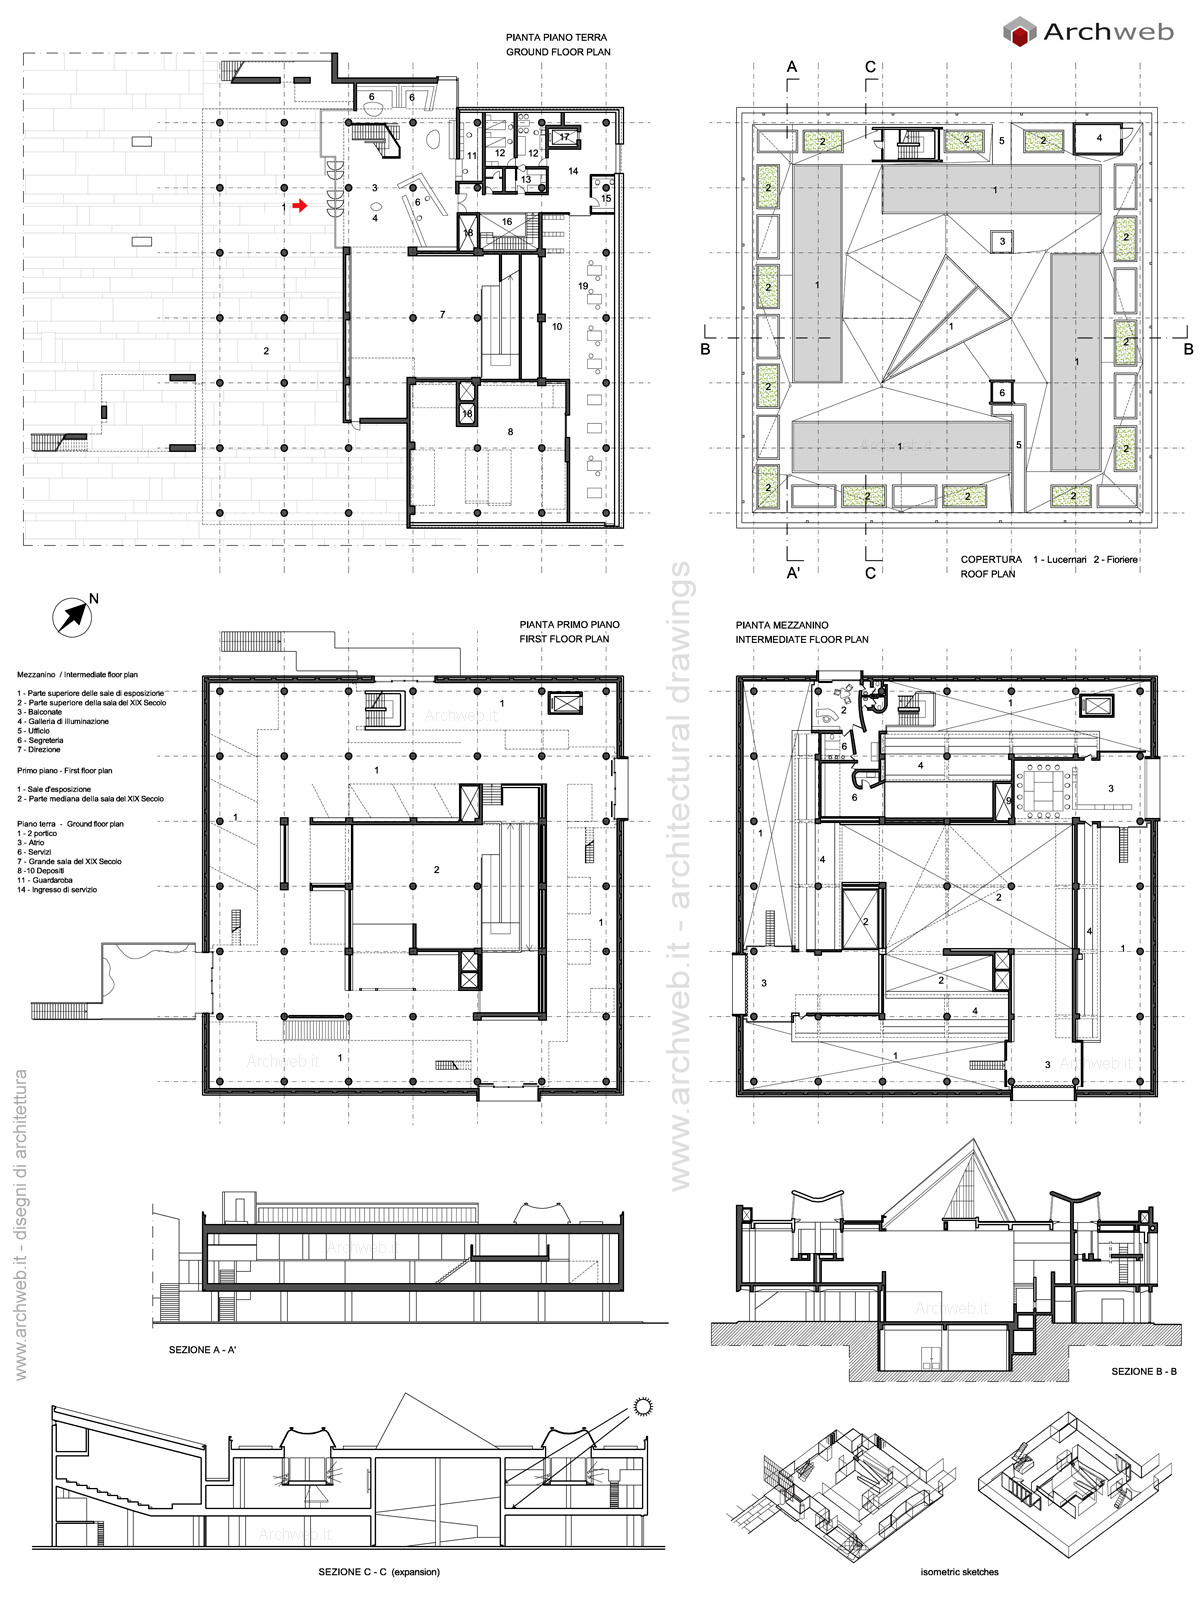 Awesome Museum Floor Plan Dwg